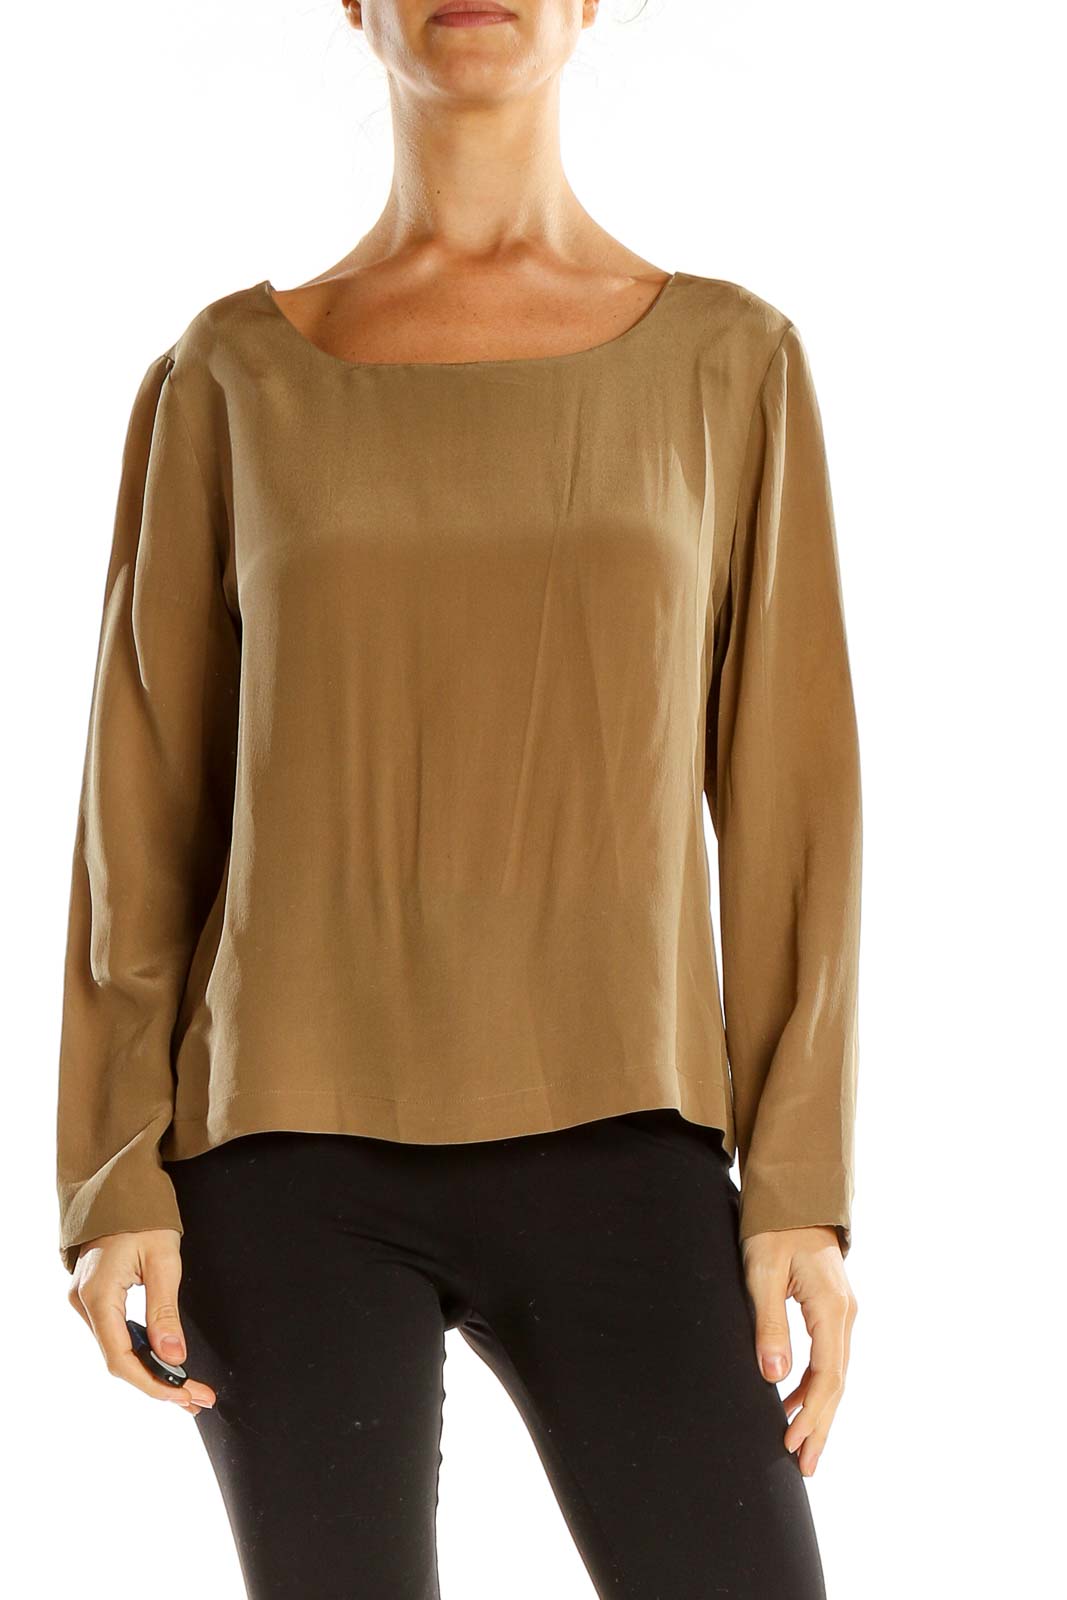 Brown Chic Blouse Front